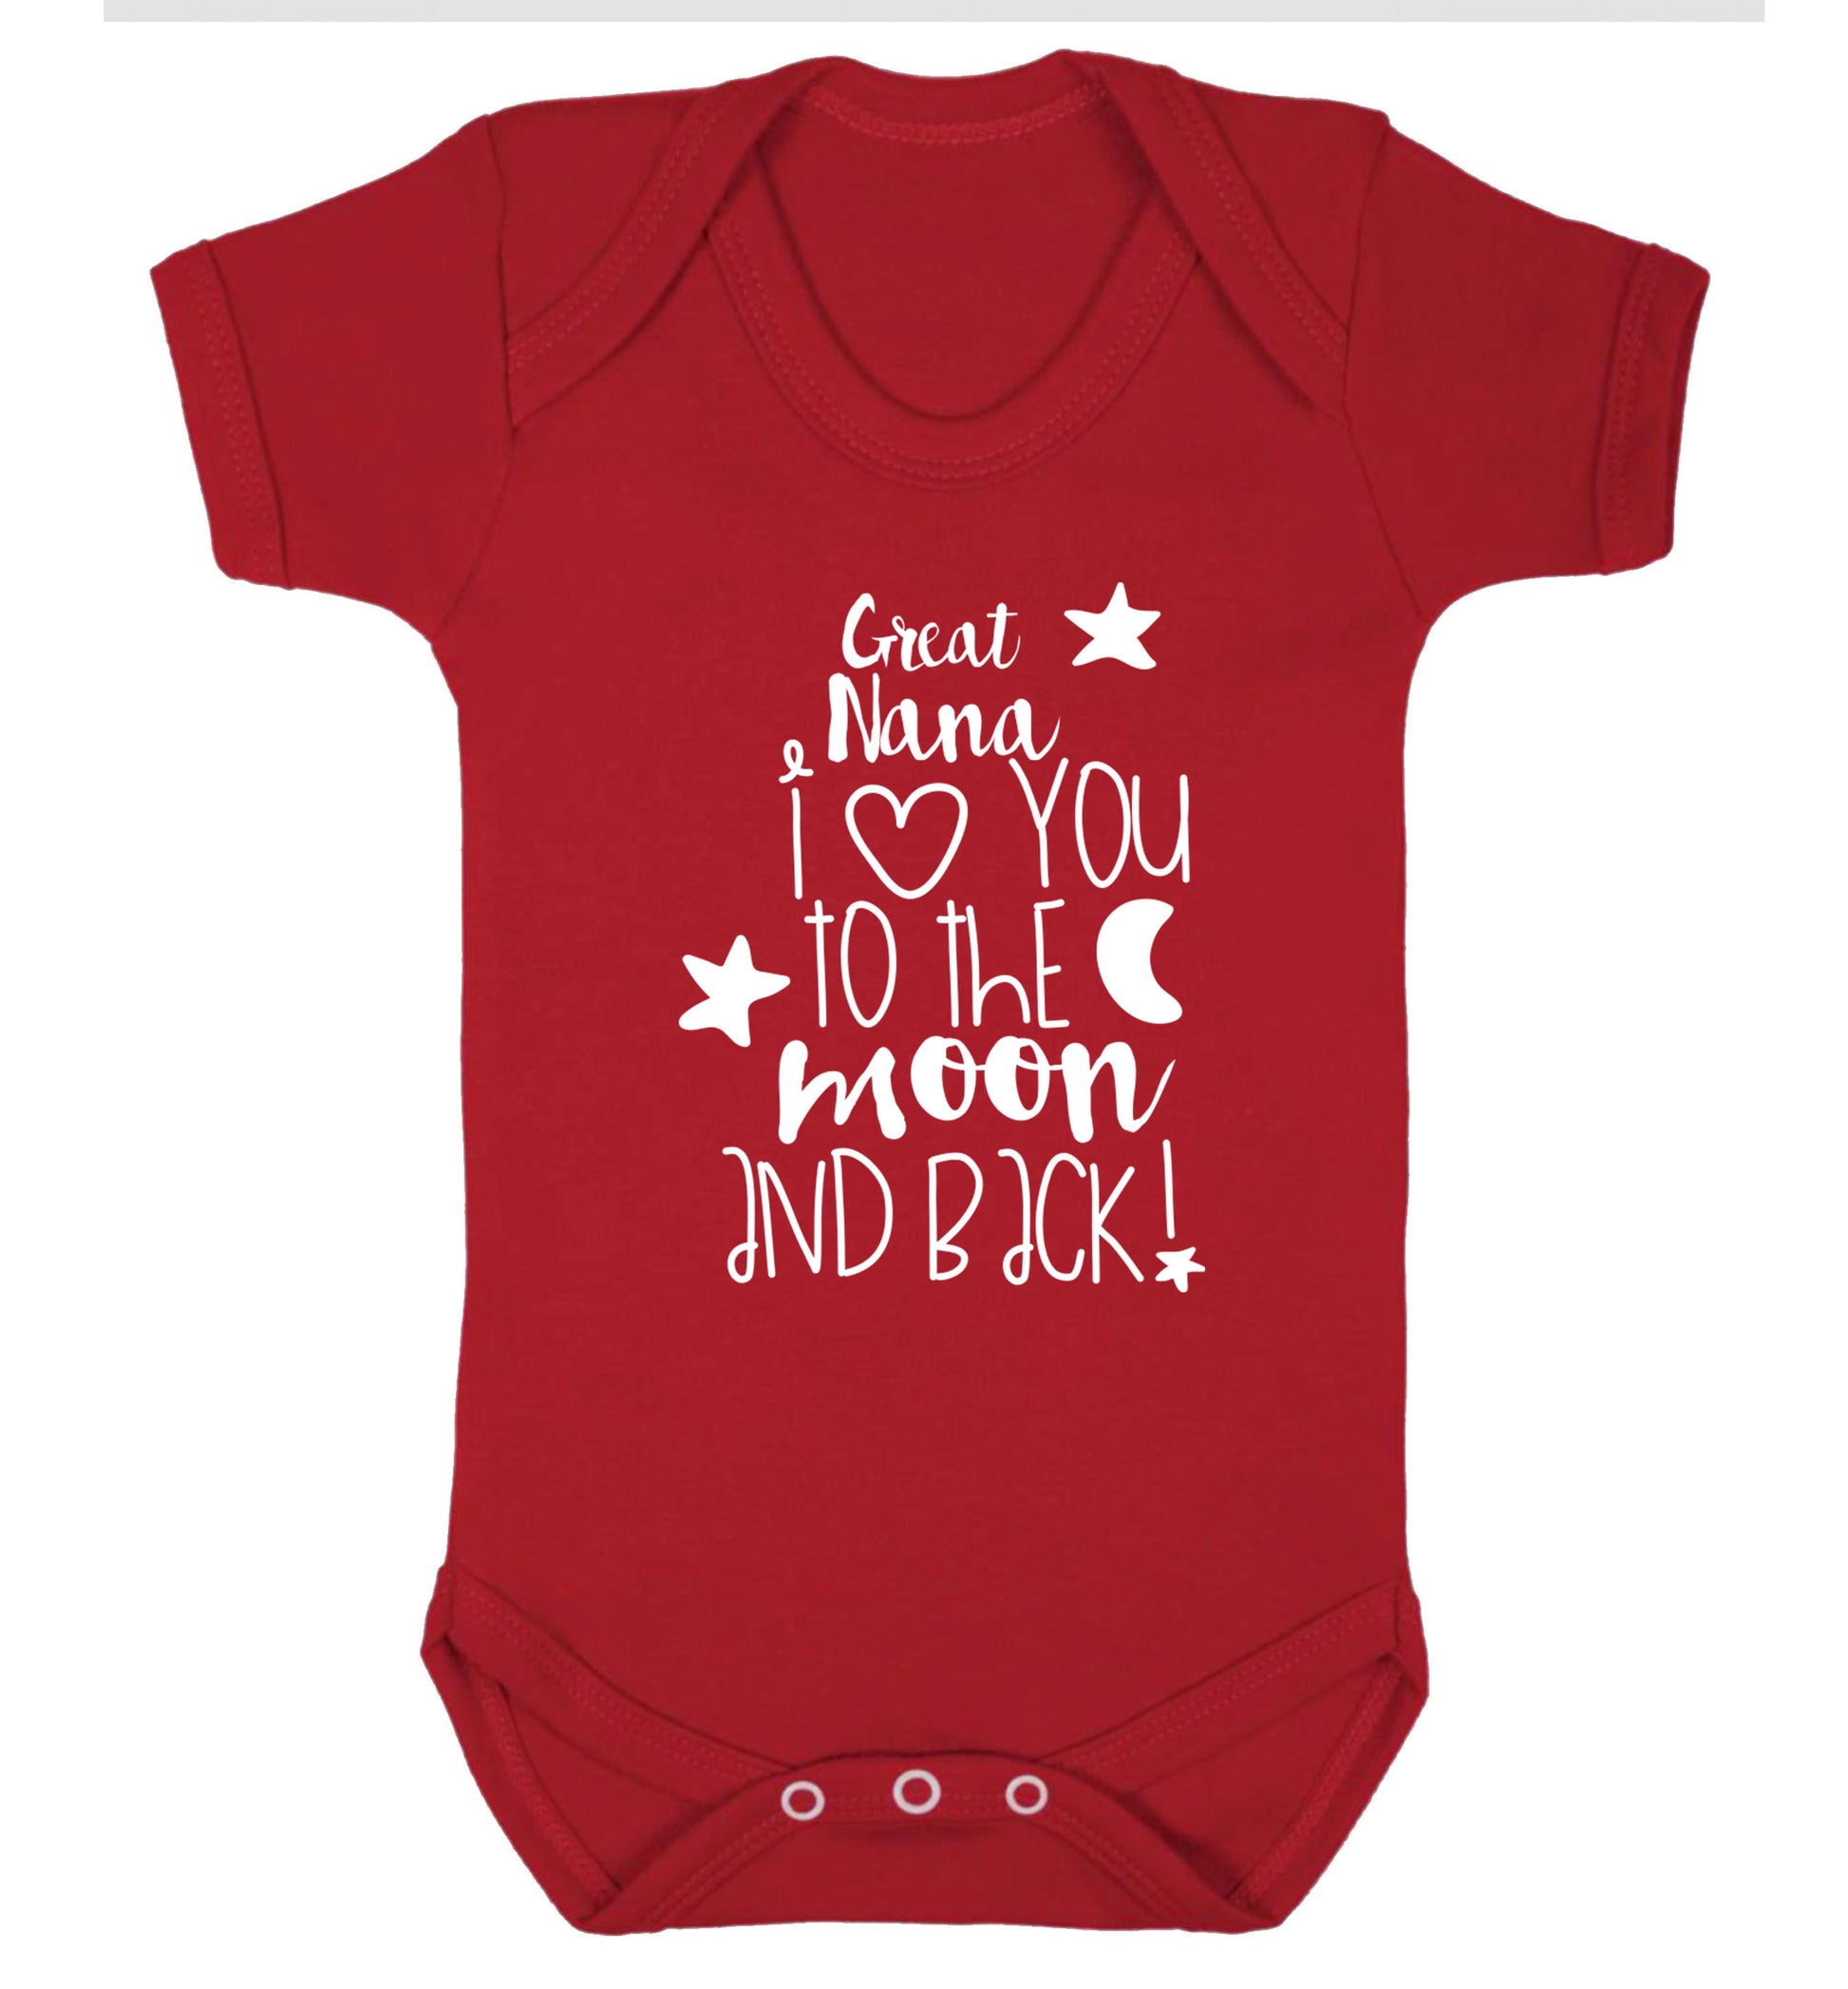 Great Nana I love you to the moon and back Baby Vest red 18-24 months